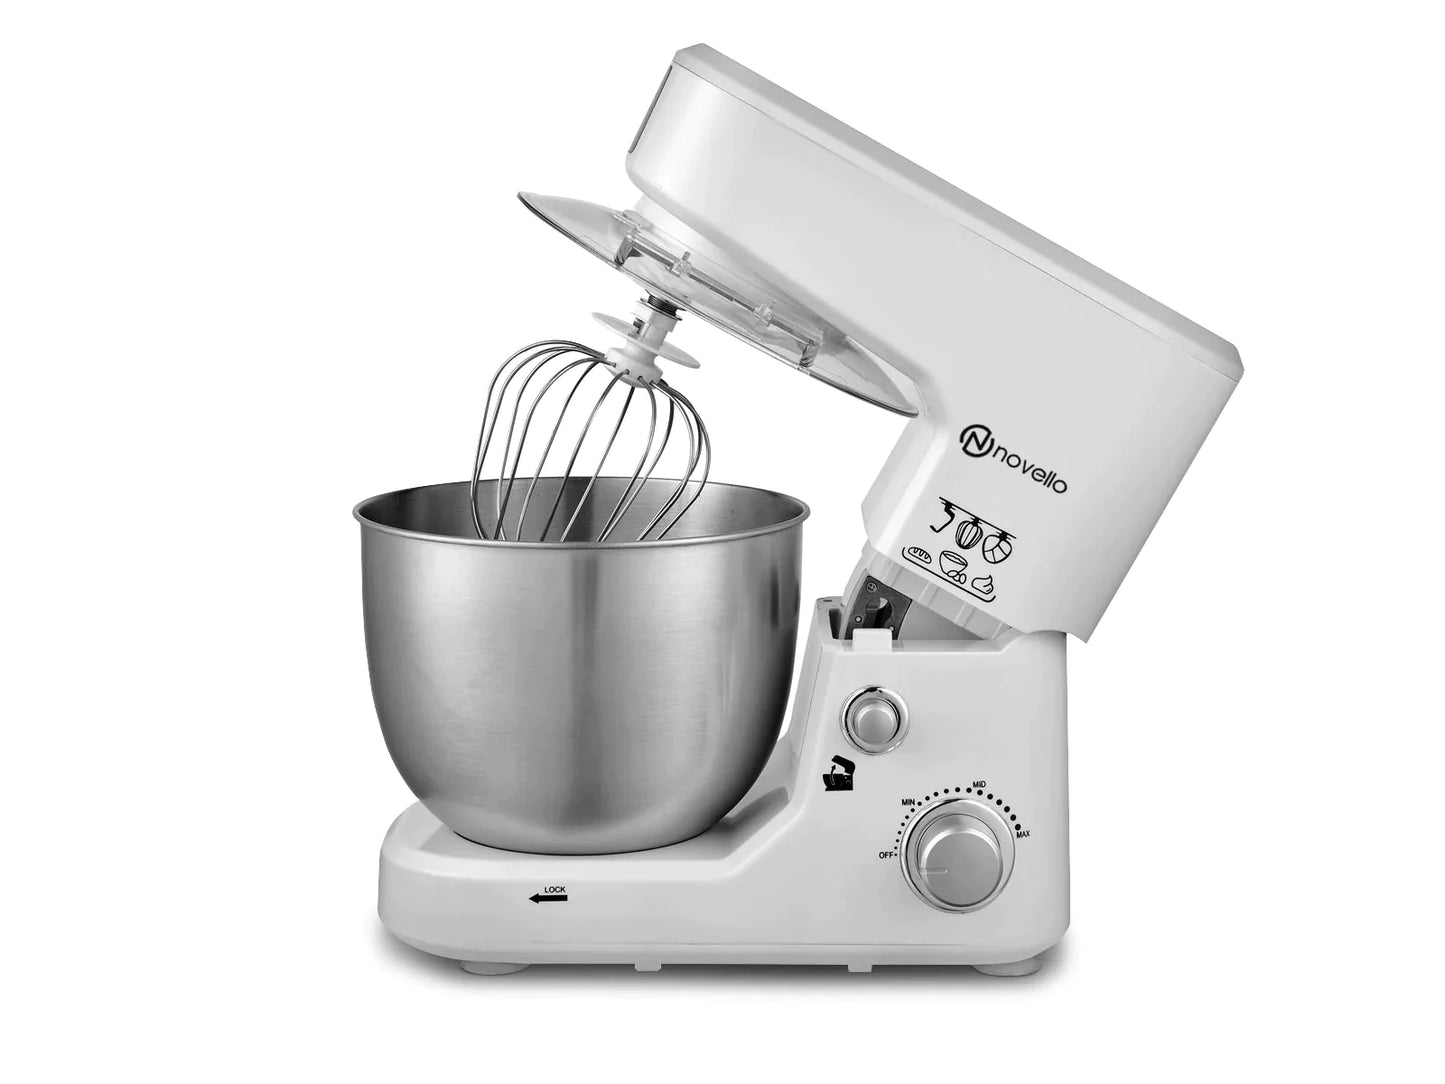 WEST POINT STAND MIXER WF4616